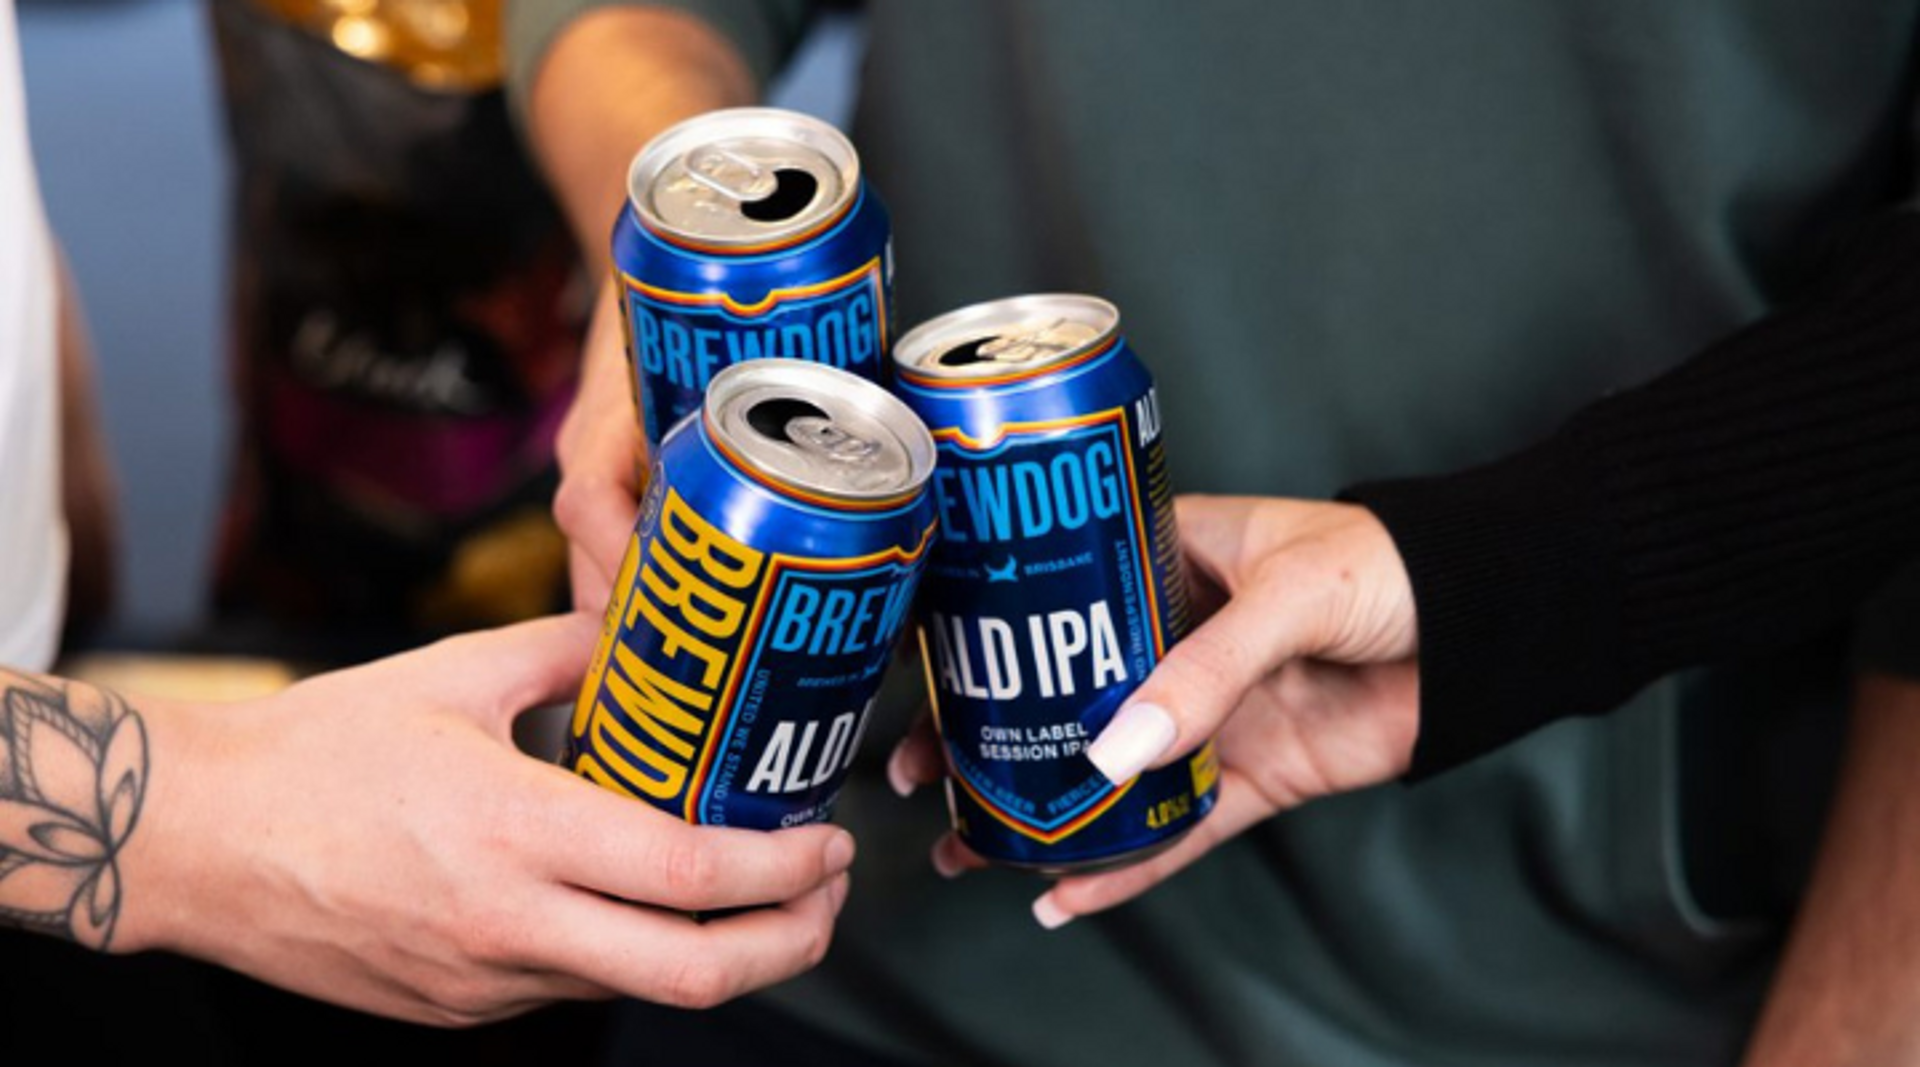 Aldi and BrewDog appeal to beer fans on a budget